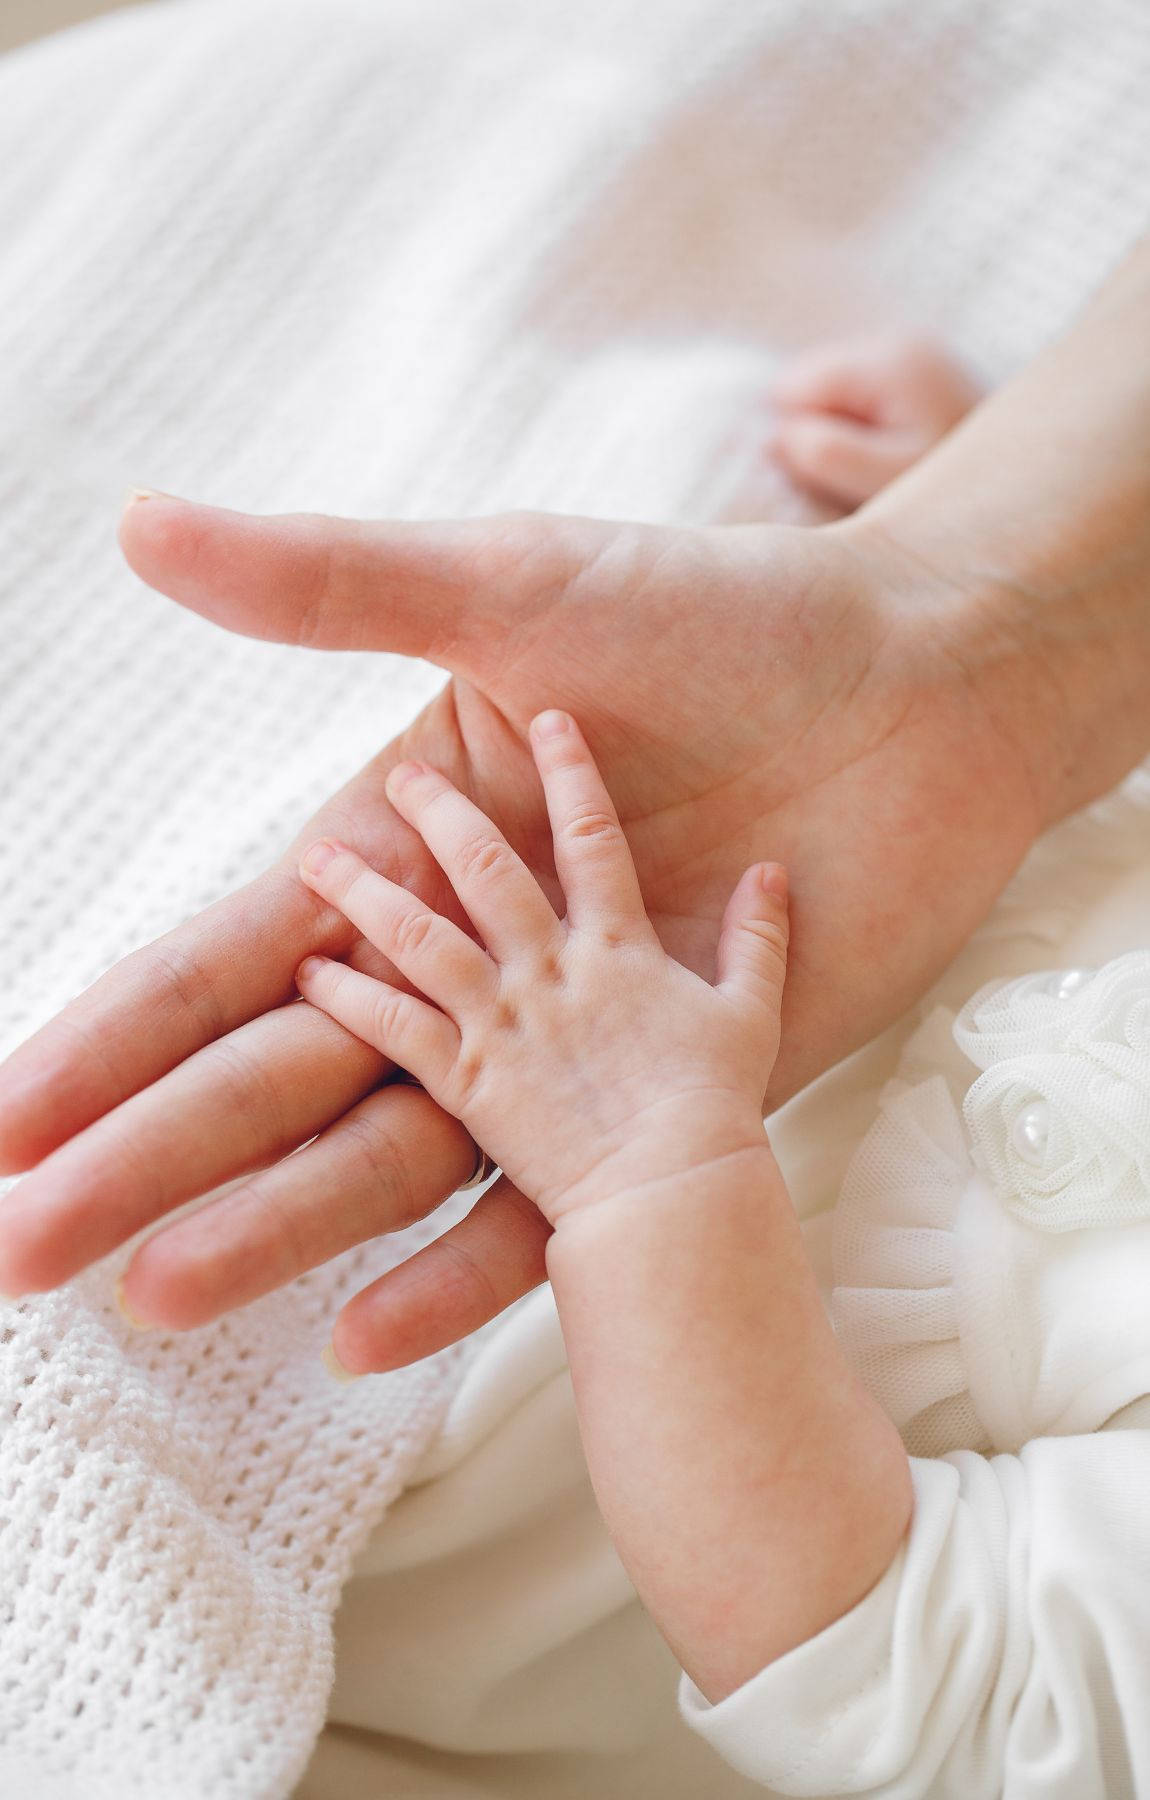 Baby Hand Resting On A Hand Wallpaper